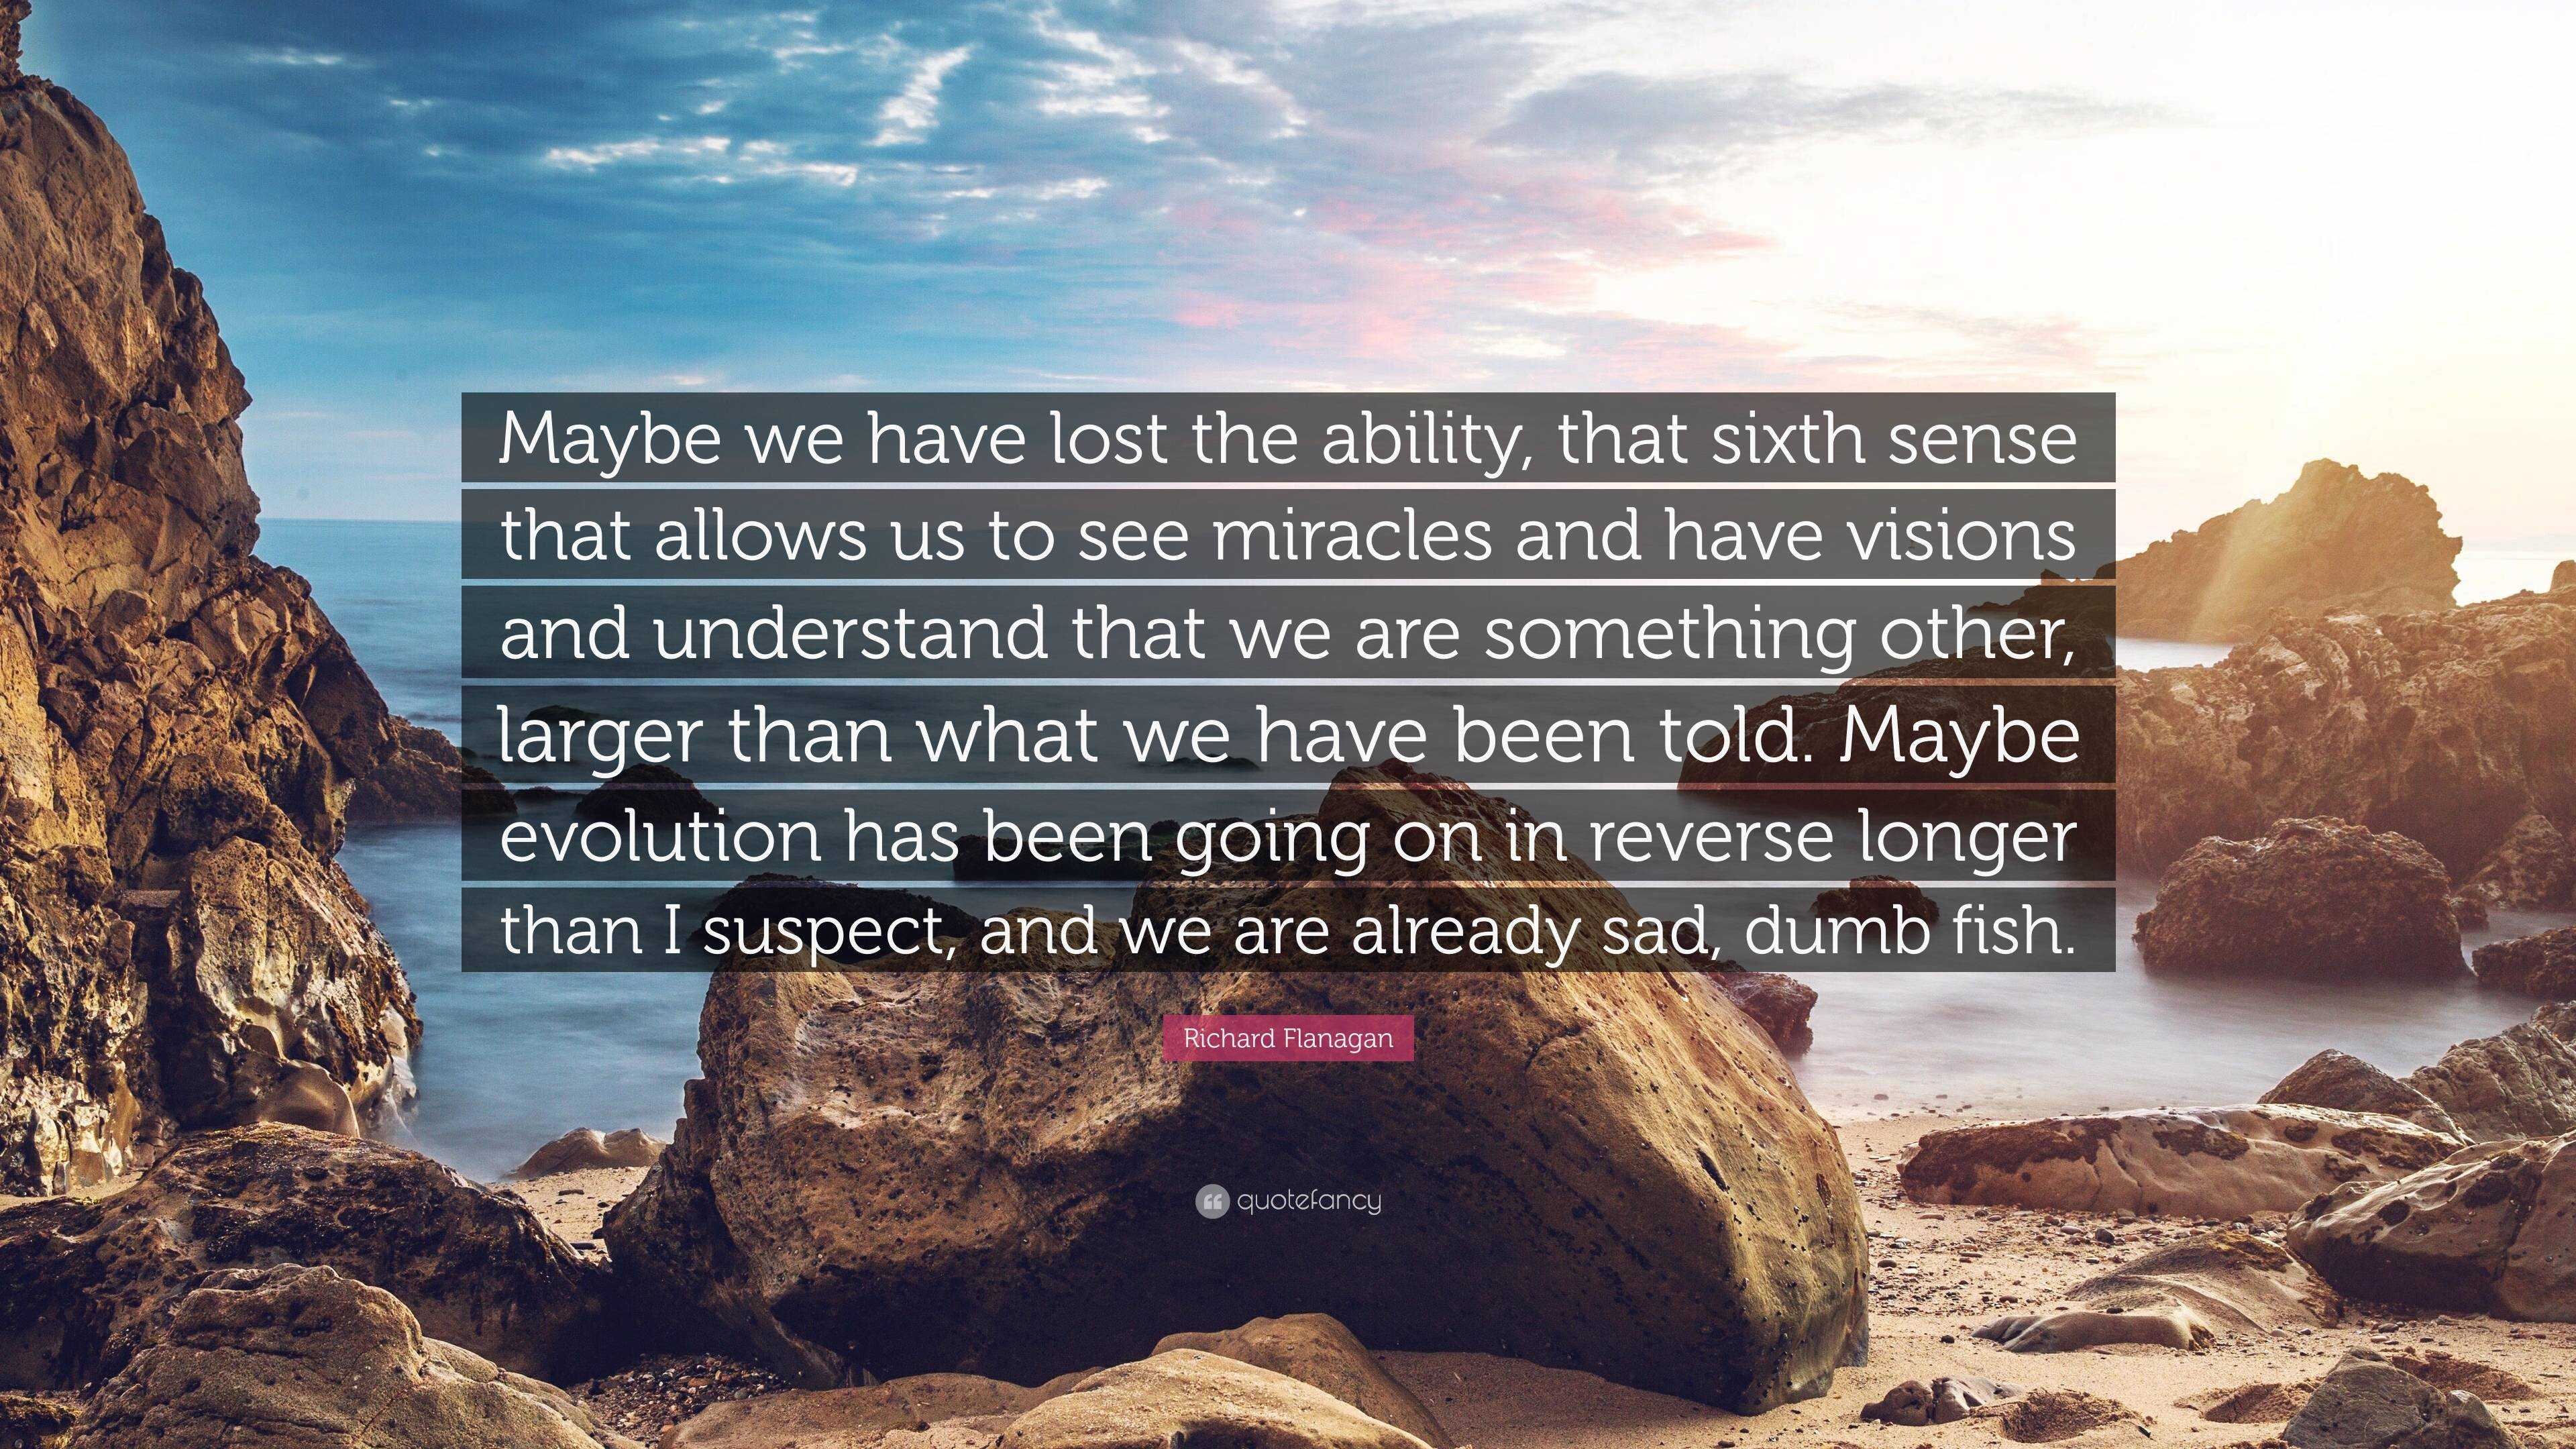 Richard Flanagan Quote: “Maybe we have lost the ability, that sixth sense  that allows us to see miracles and have visions and understand that we ”